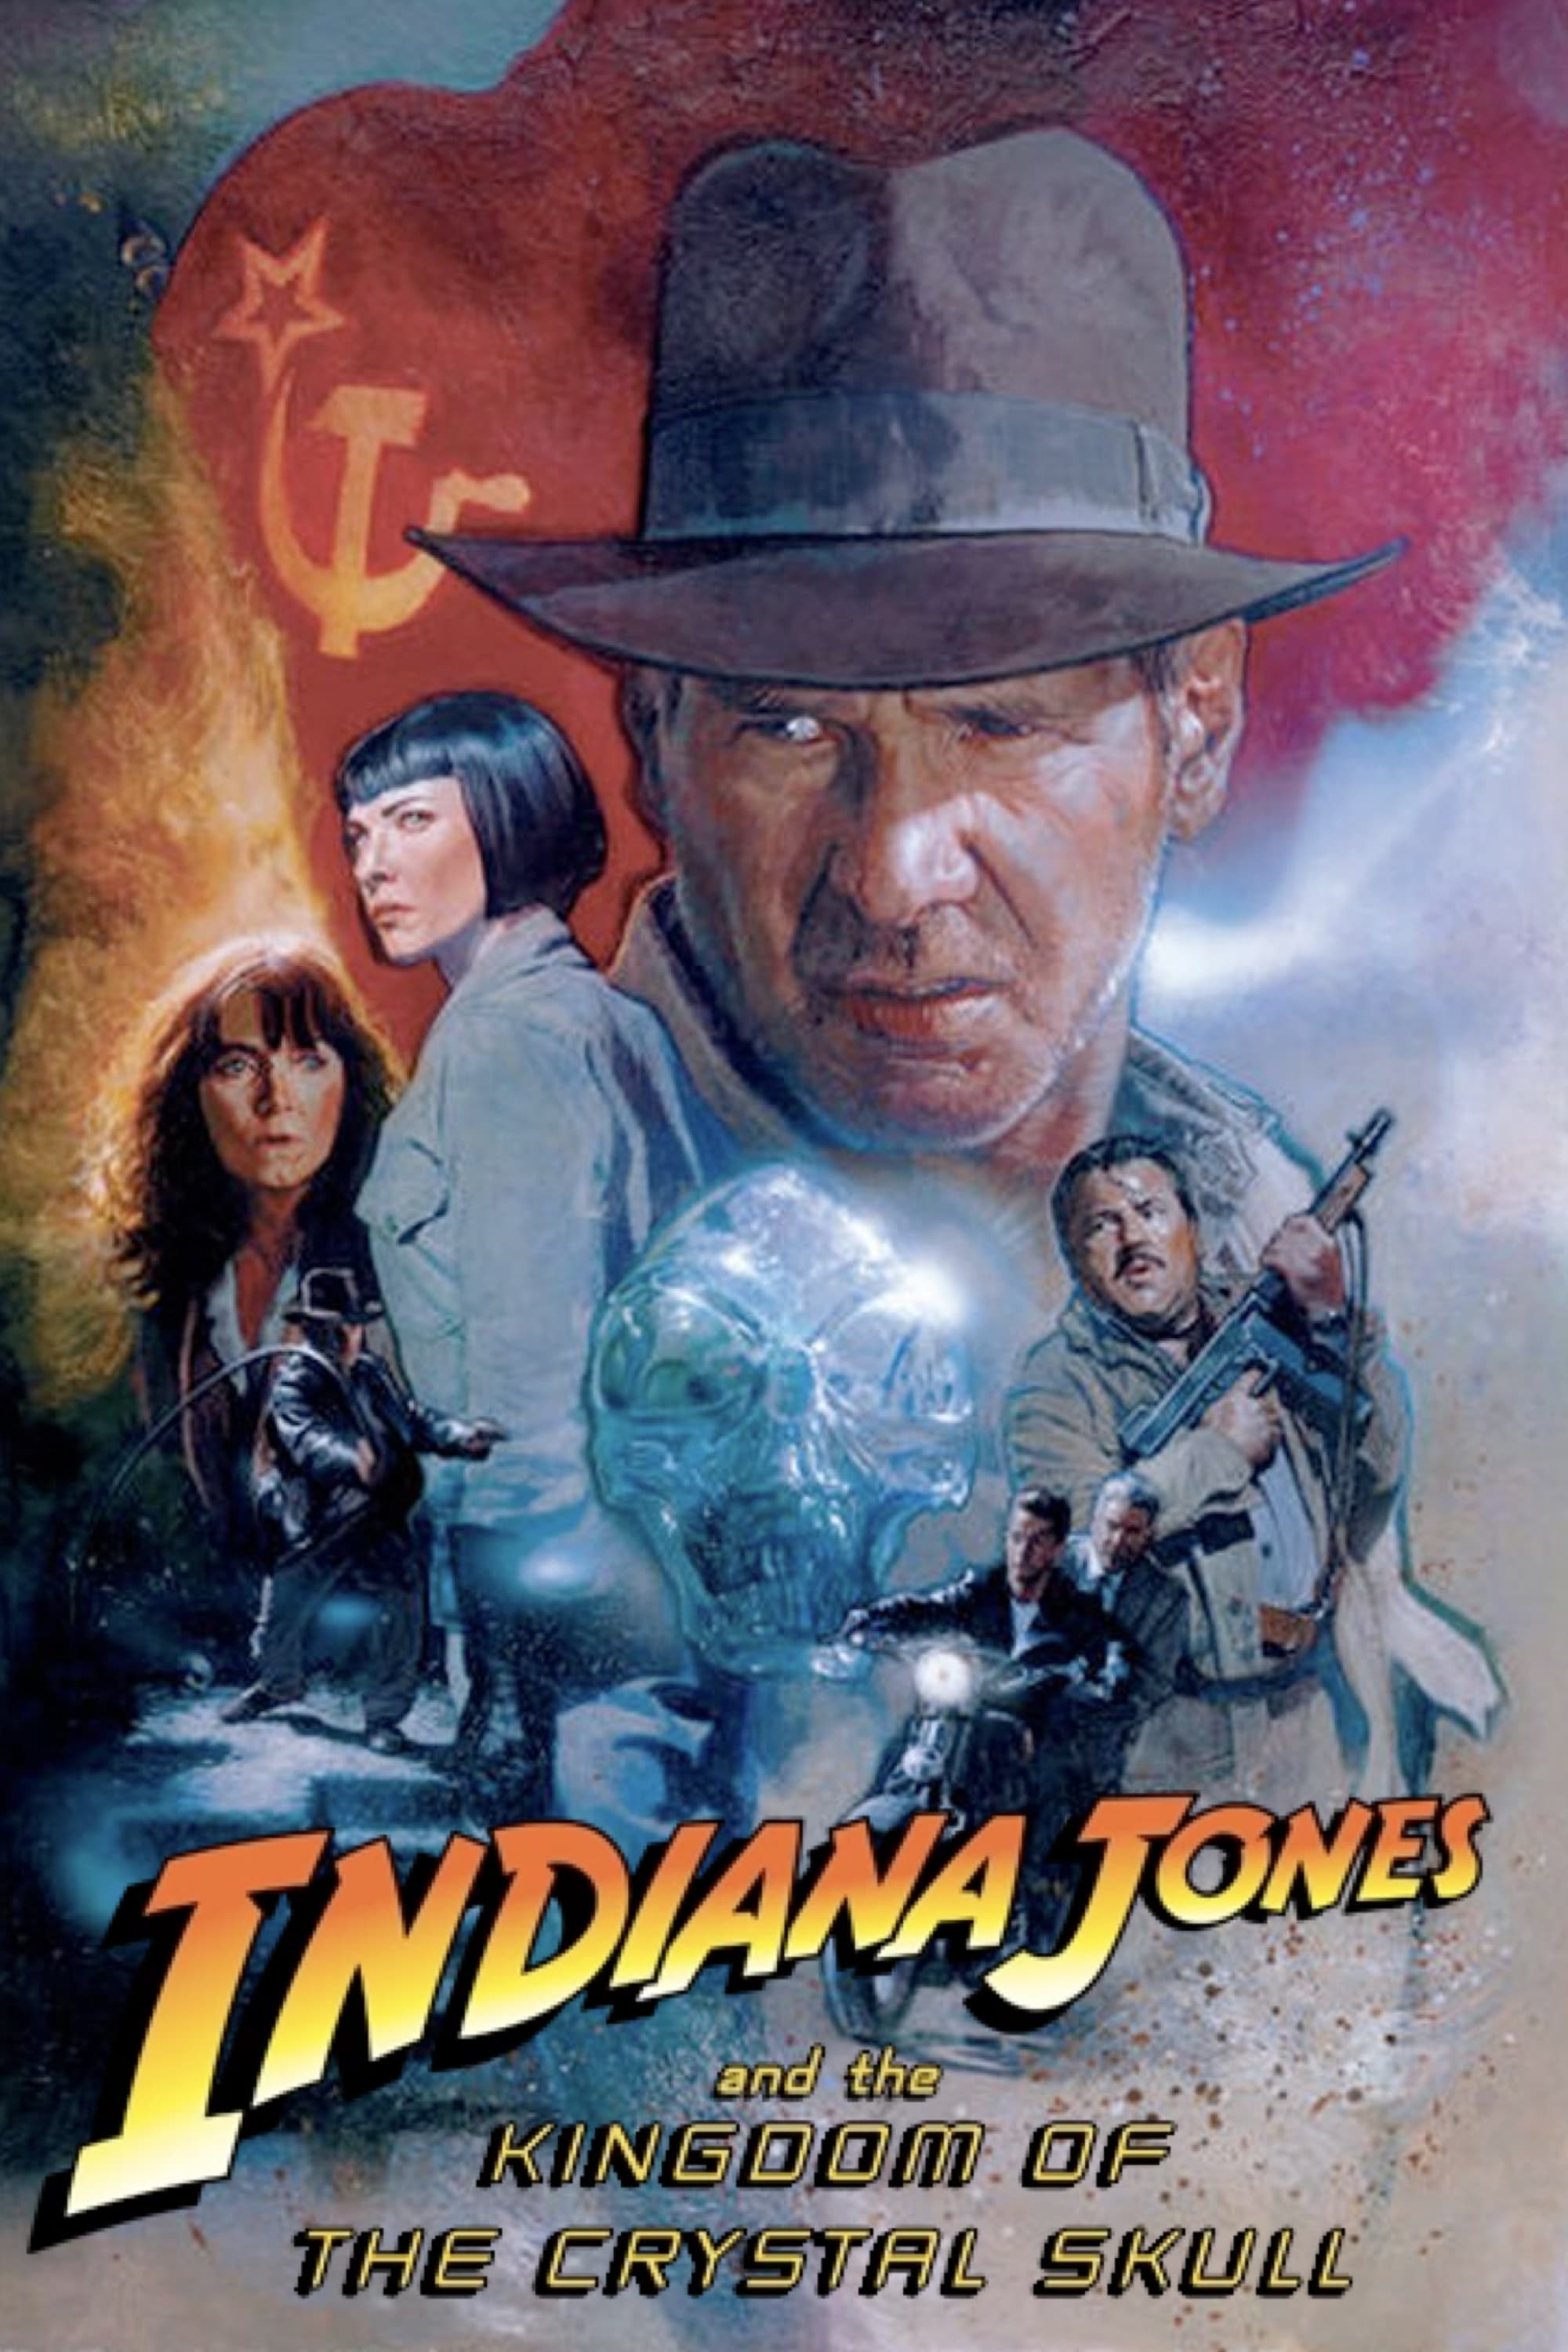 Indiana Jones and the Kingdom of the Crystal Skull Movie poster